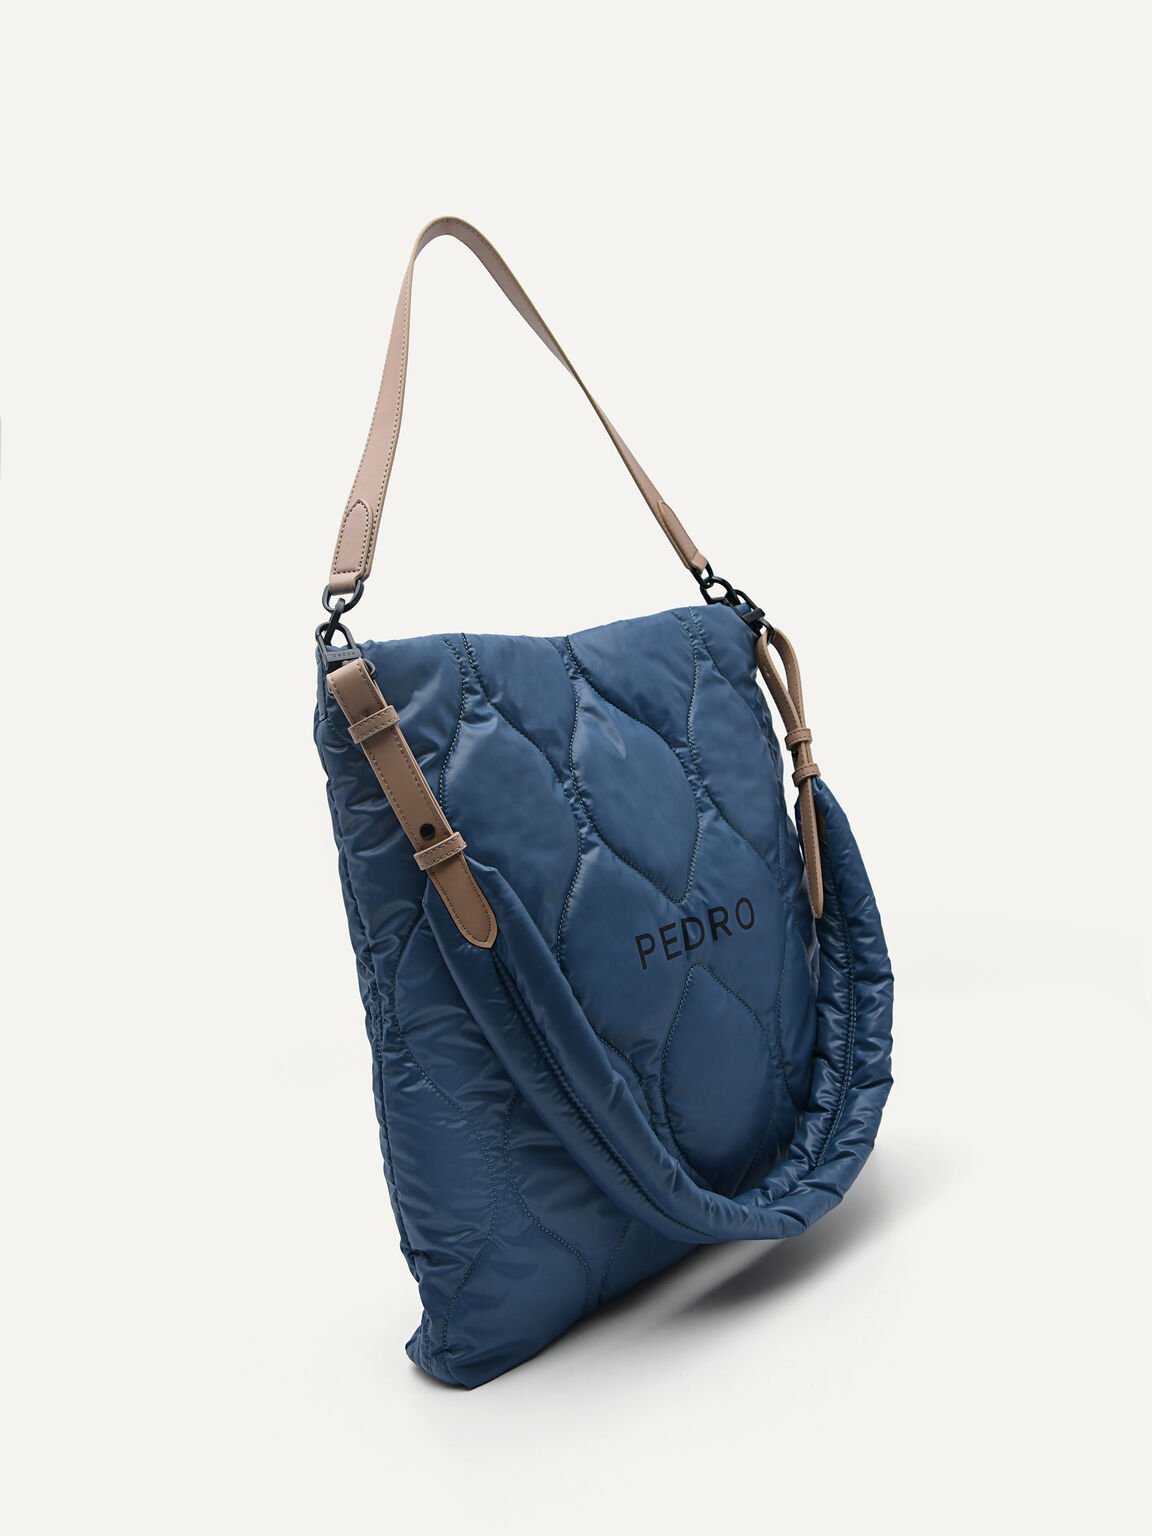 Plush Quilted Single Strap Tote, Navy